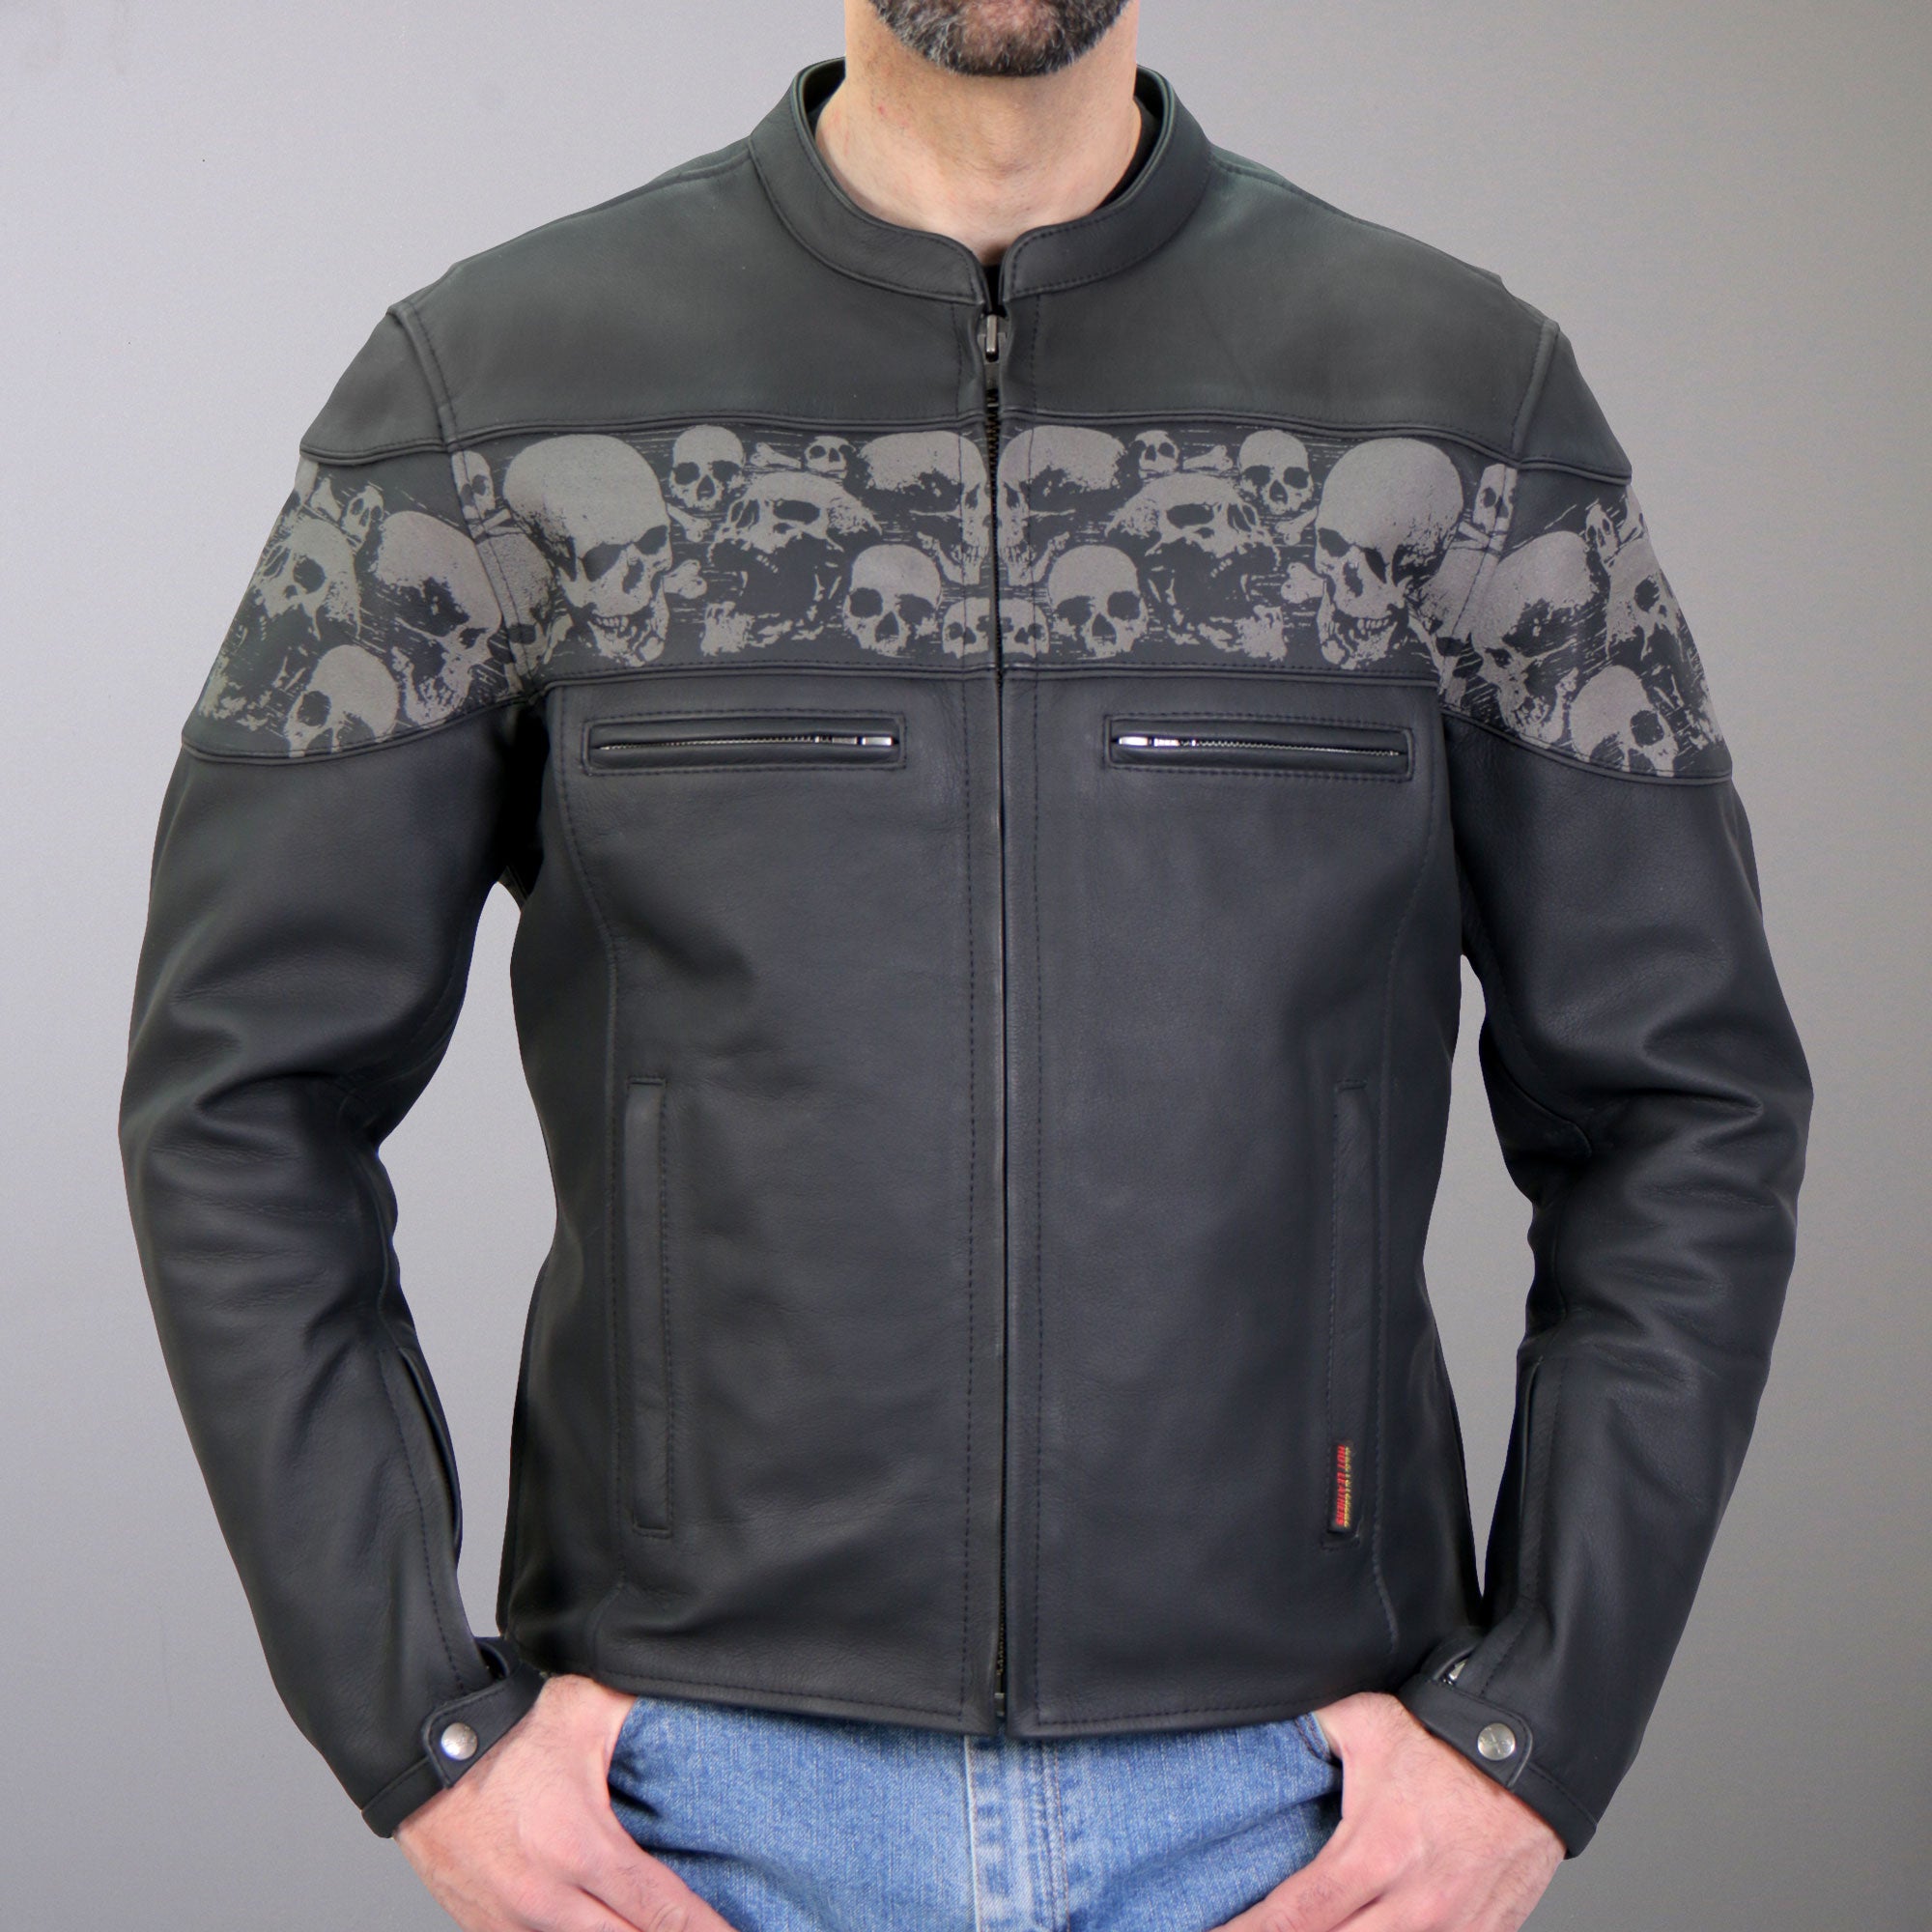 Hot Leathers JKM2002 Men’s Black ‘Reflective Skull' Printed Leather Jacket with Concealed Carry Pockets - Black / 3X-Large